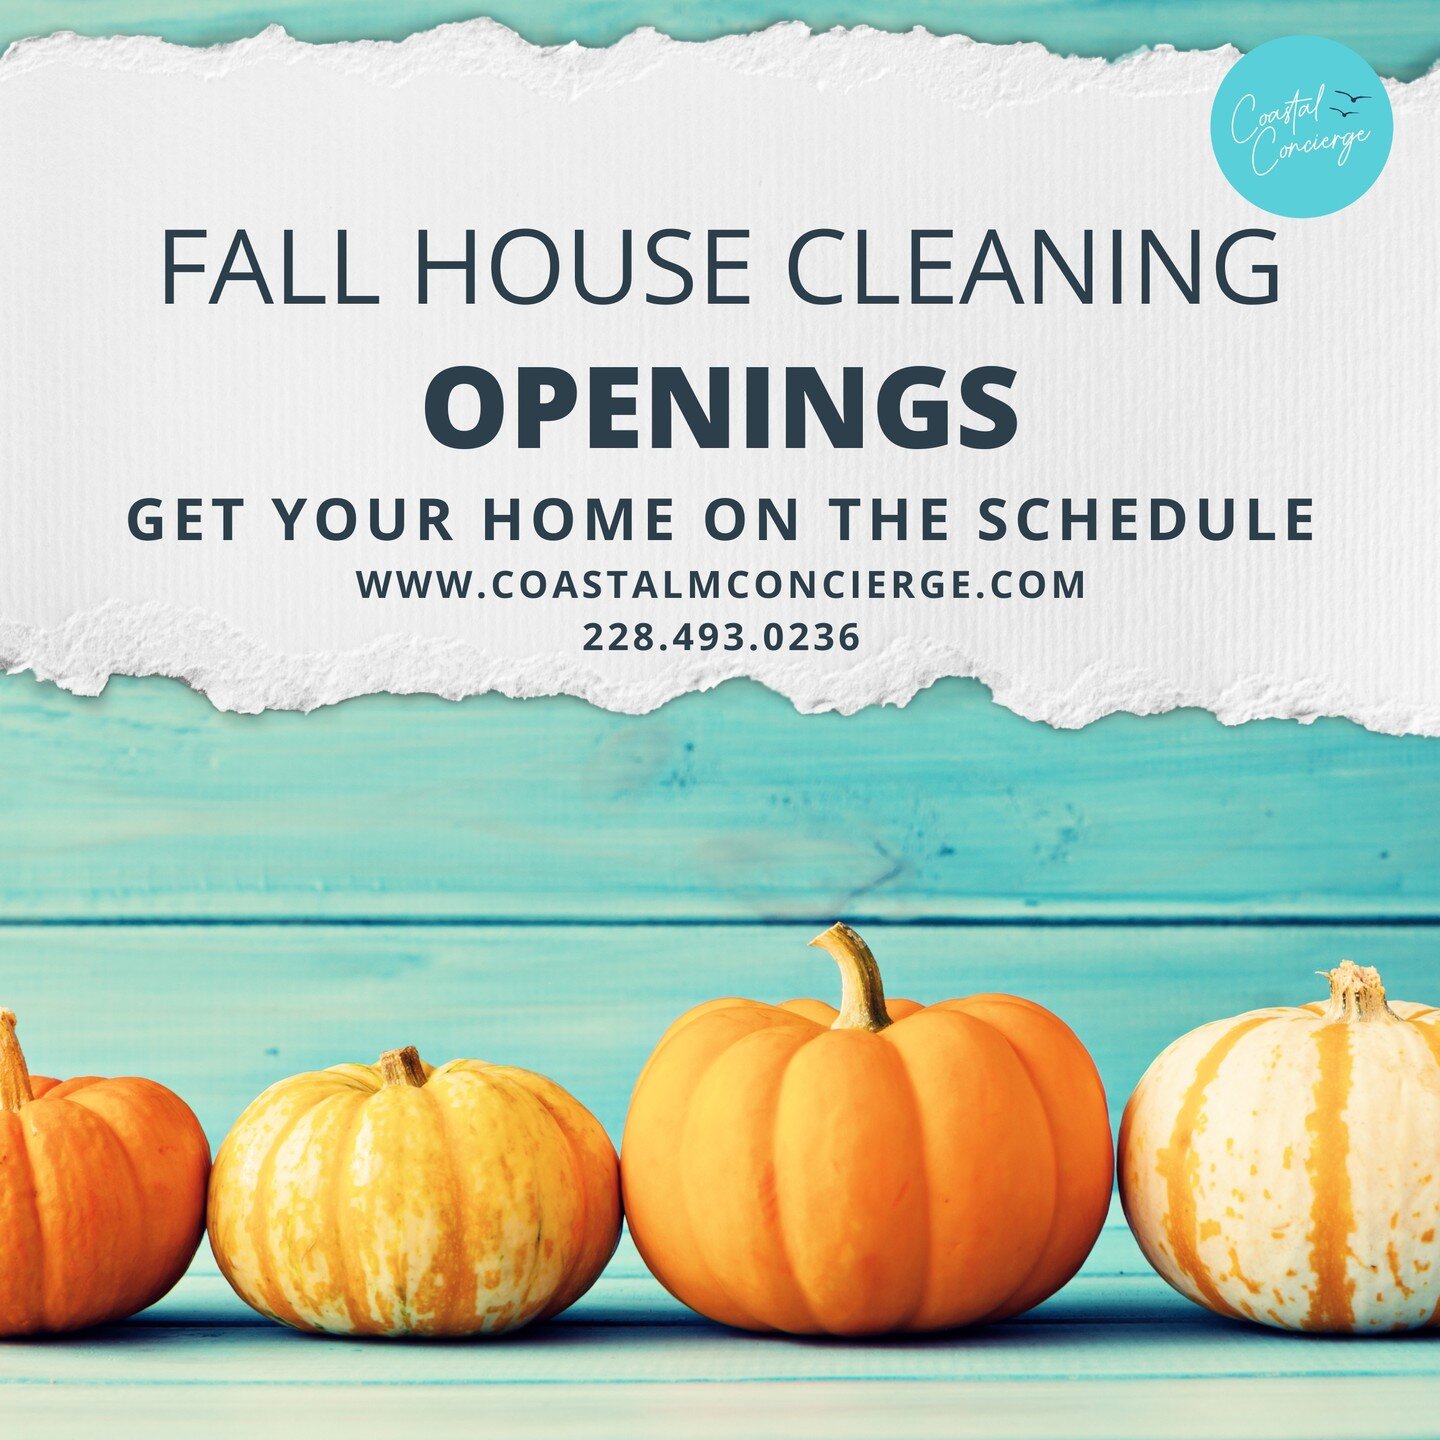 Schedule your house cleaning today!
We service Airbnb, second homes and residential clients! Our services are satisfaction guaranteed!

www.coastalmsconcierge.com
228.493.0236
coastal.concierge@yahoo.com